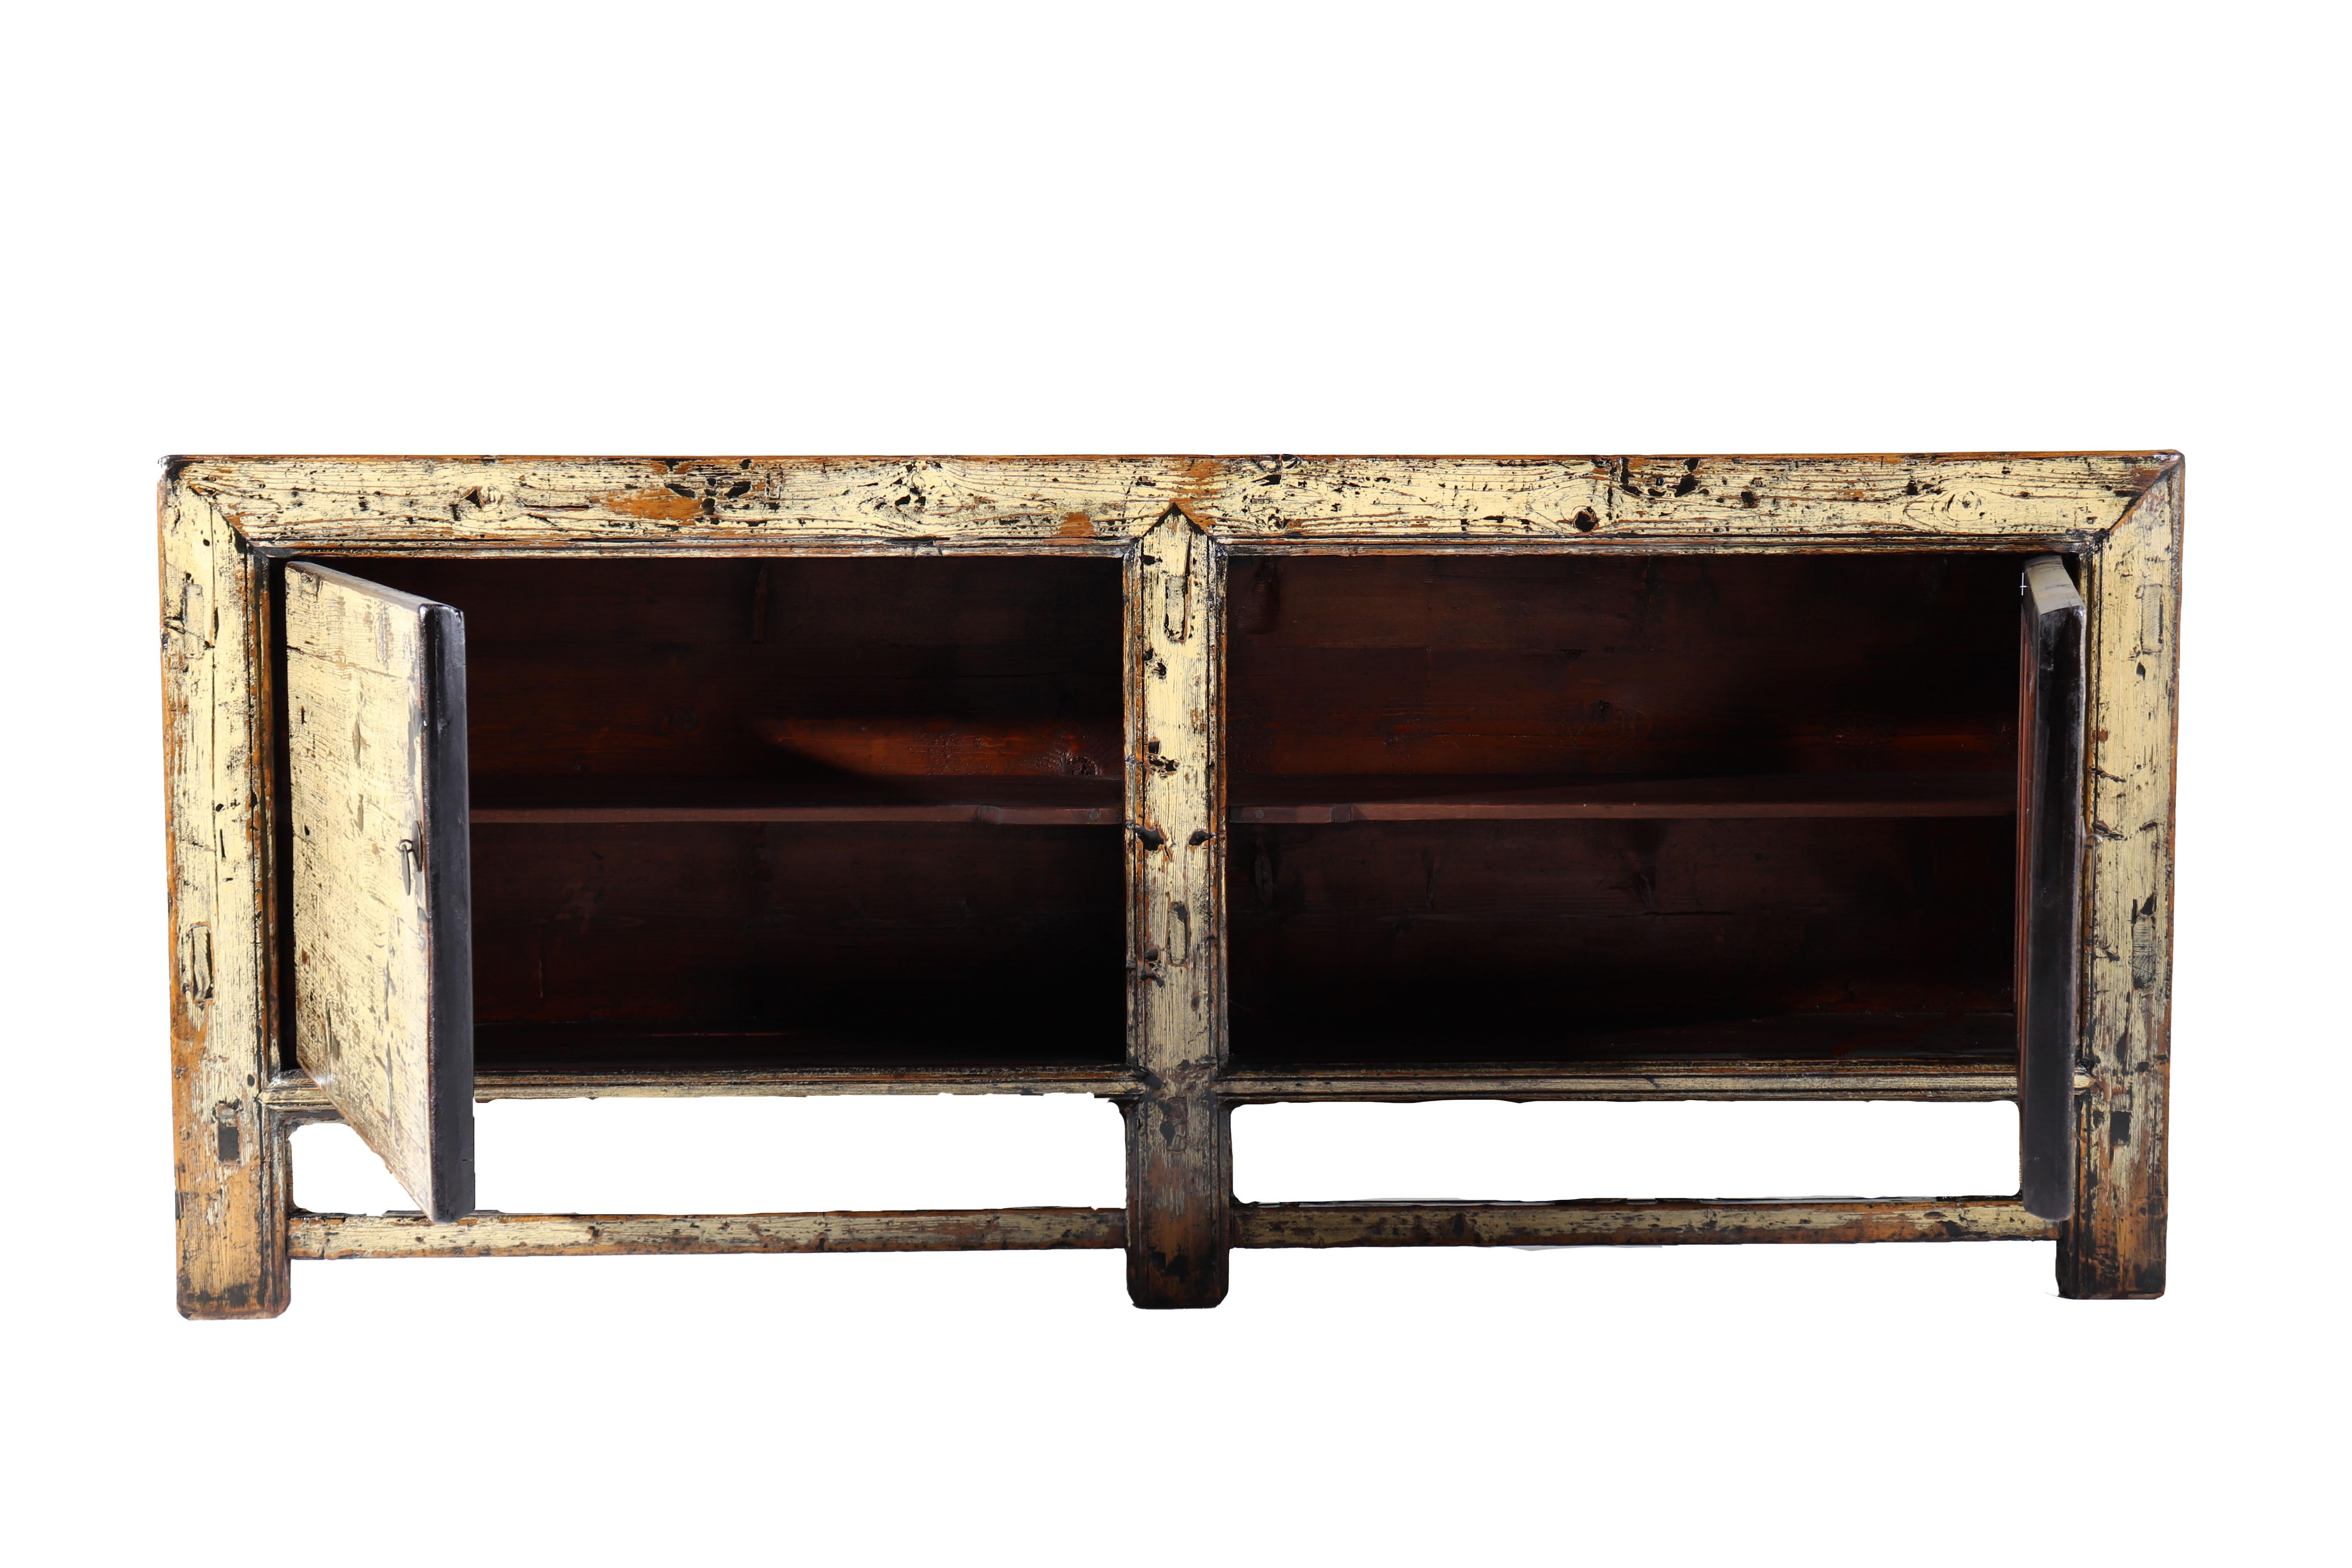 European Vintage Two-Door Server in Original Paint Patina with Lacquer over Glaze